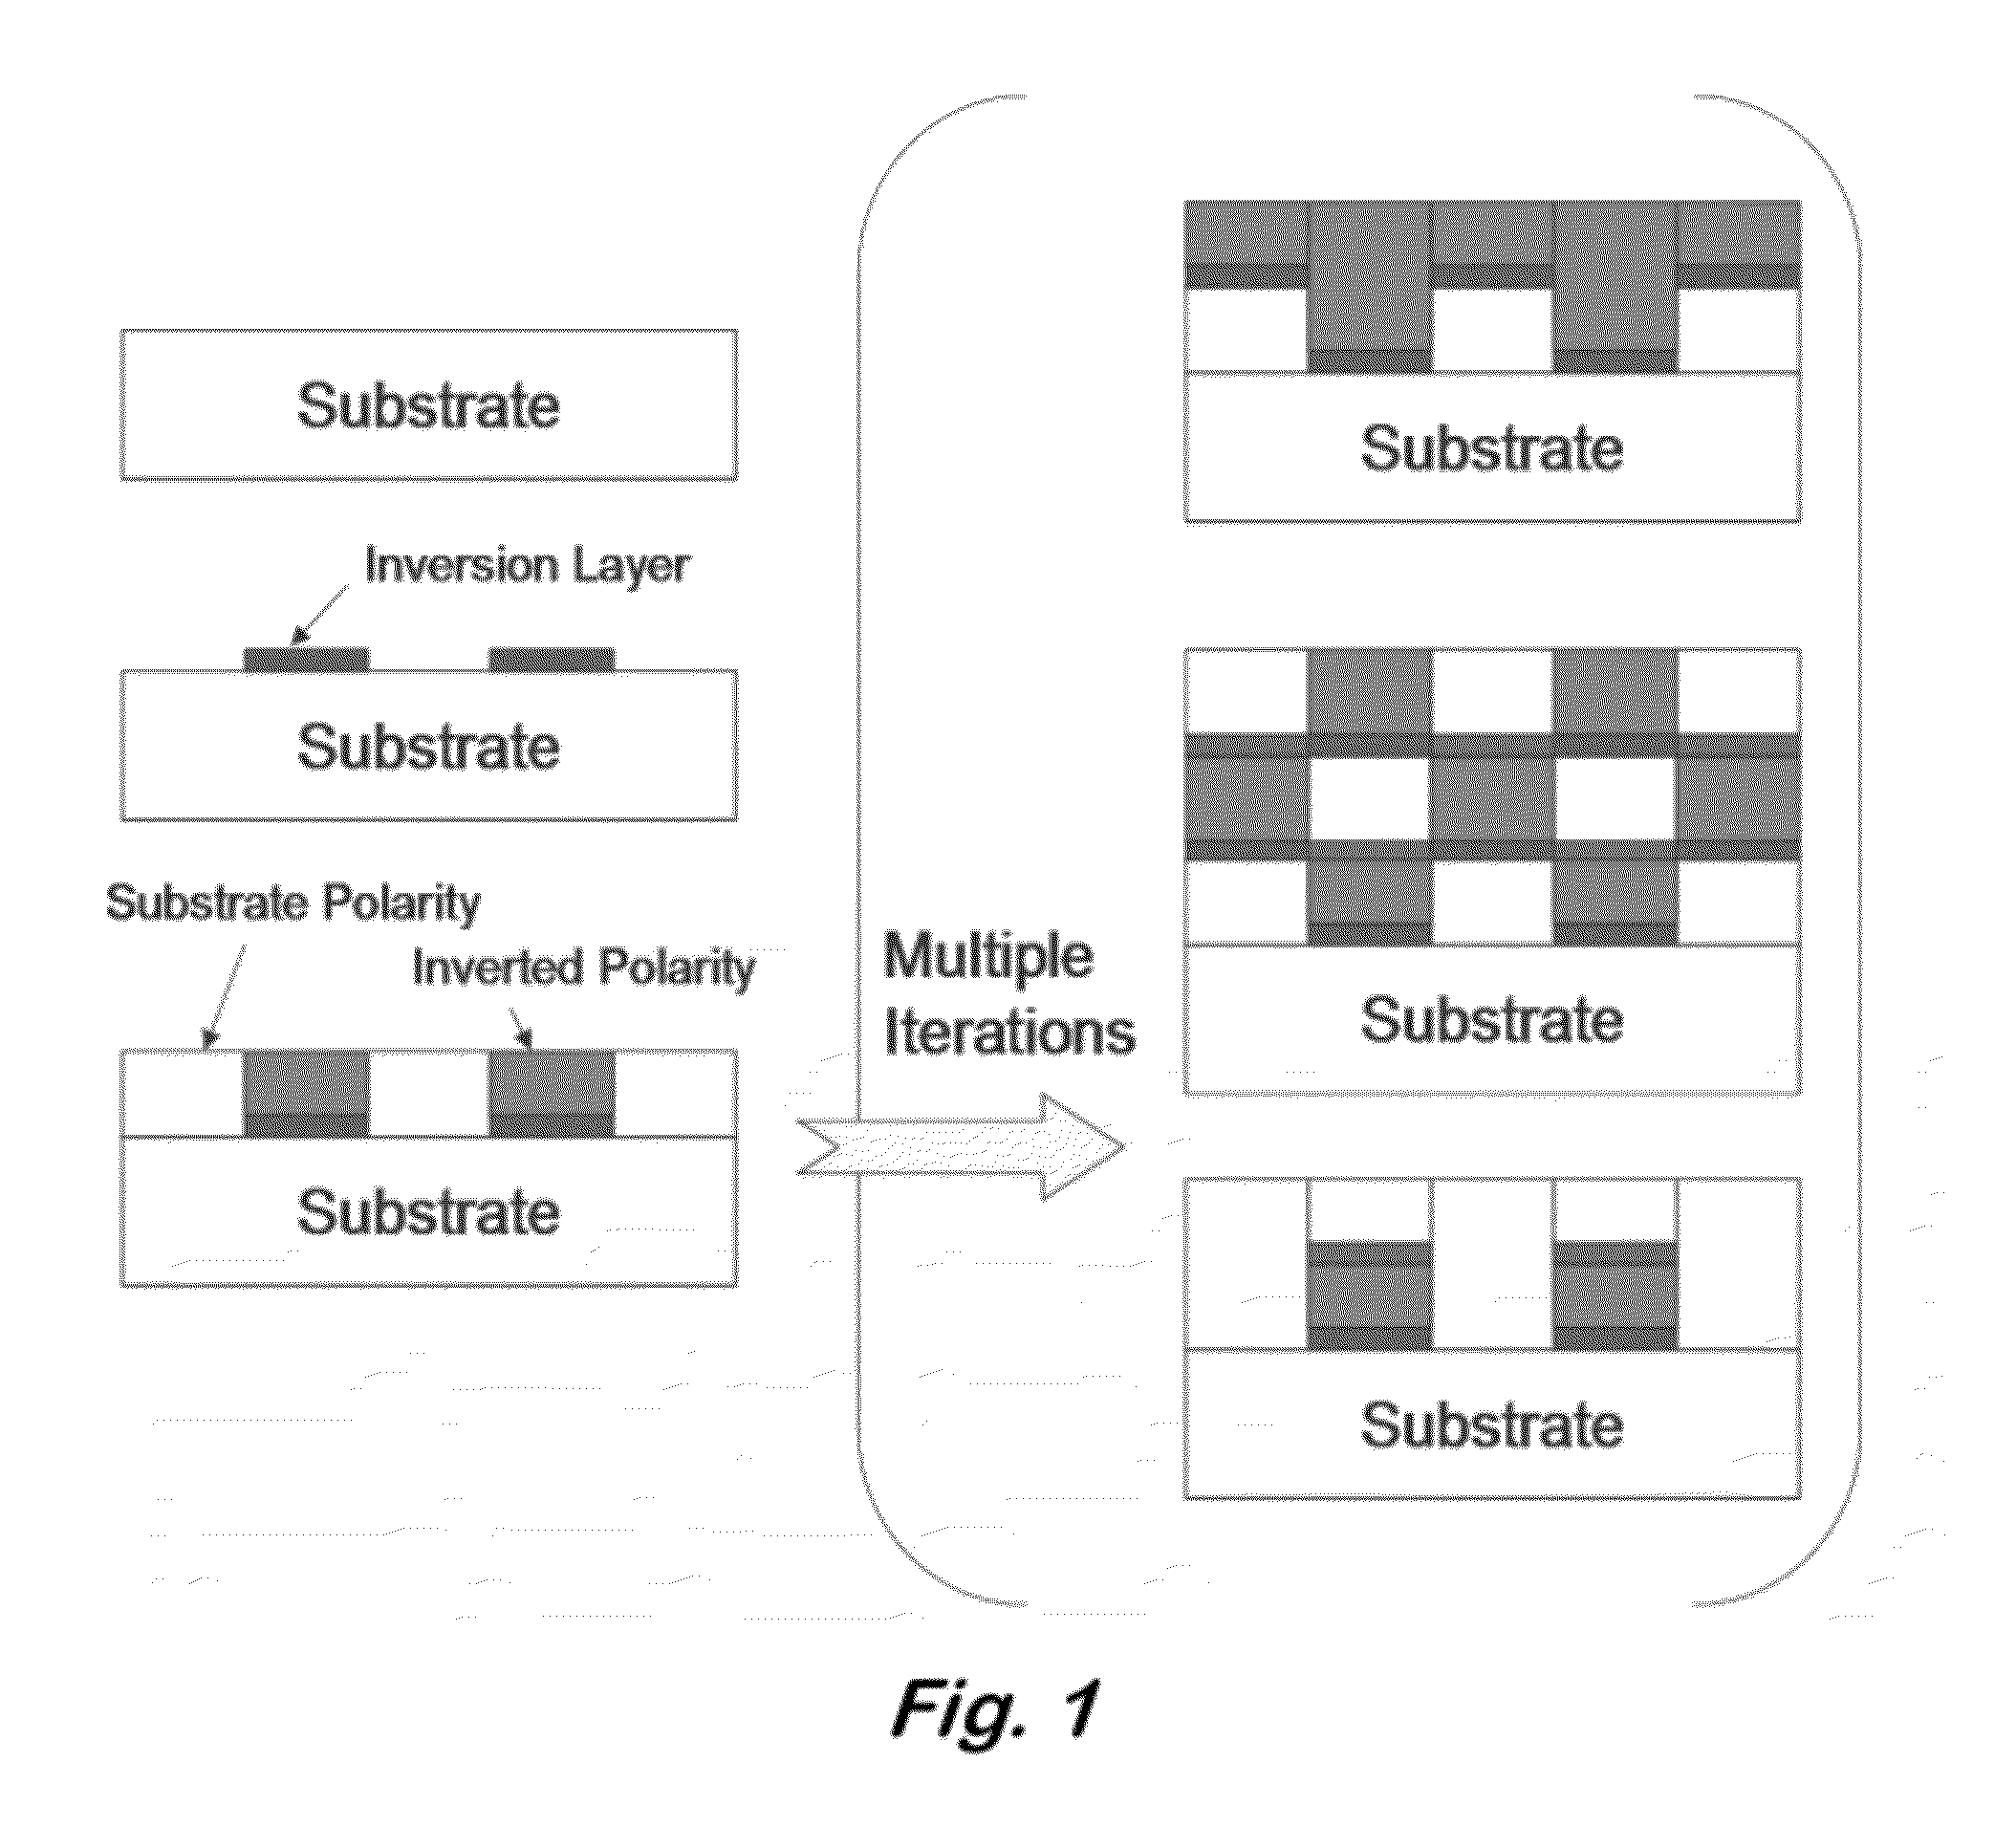 Method for Vertical and Lateral Control of III-N Polarity